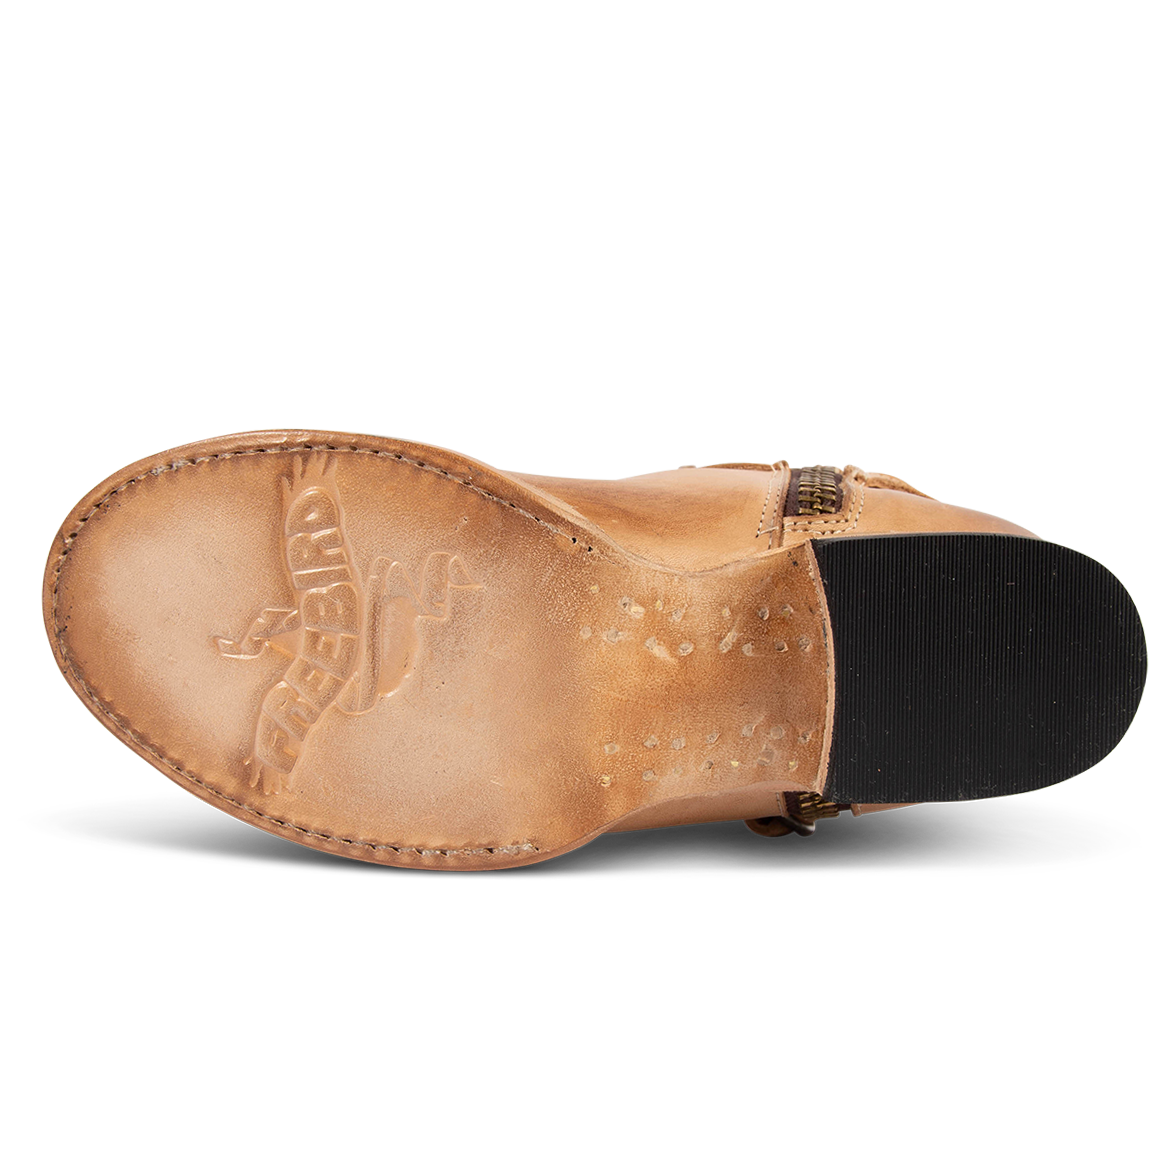 Leather sole imprinted with FREEBIRD on women's Risky beige fold-over tall boot